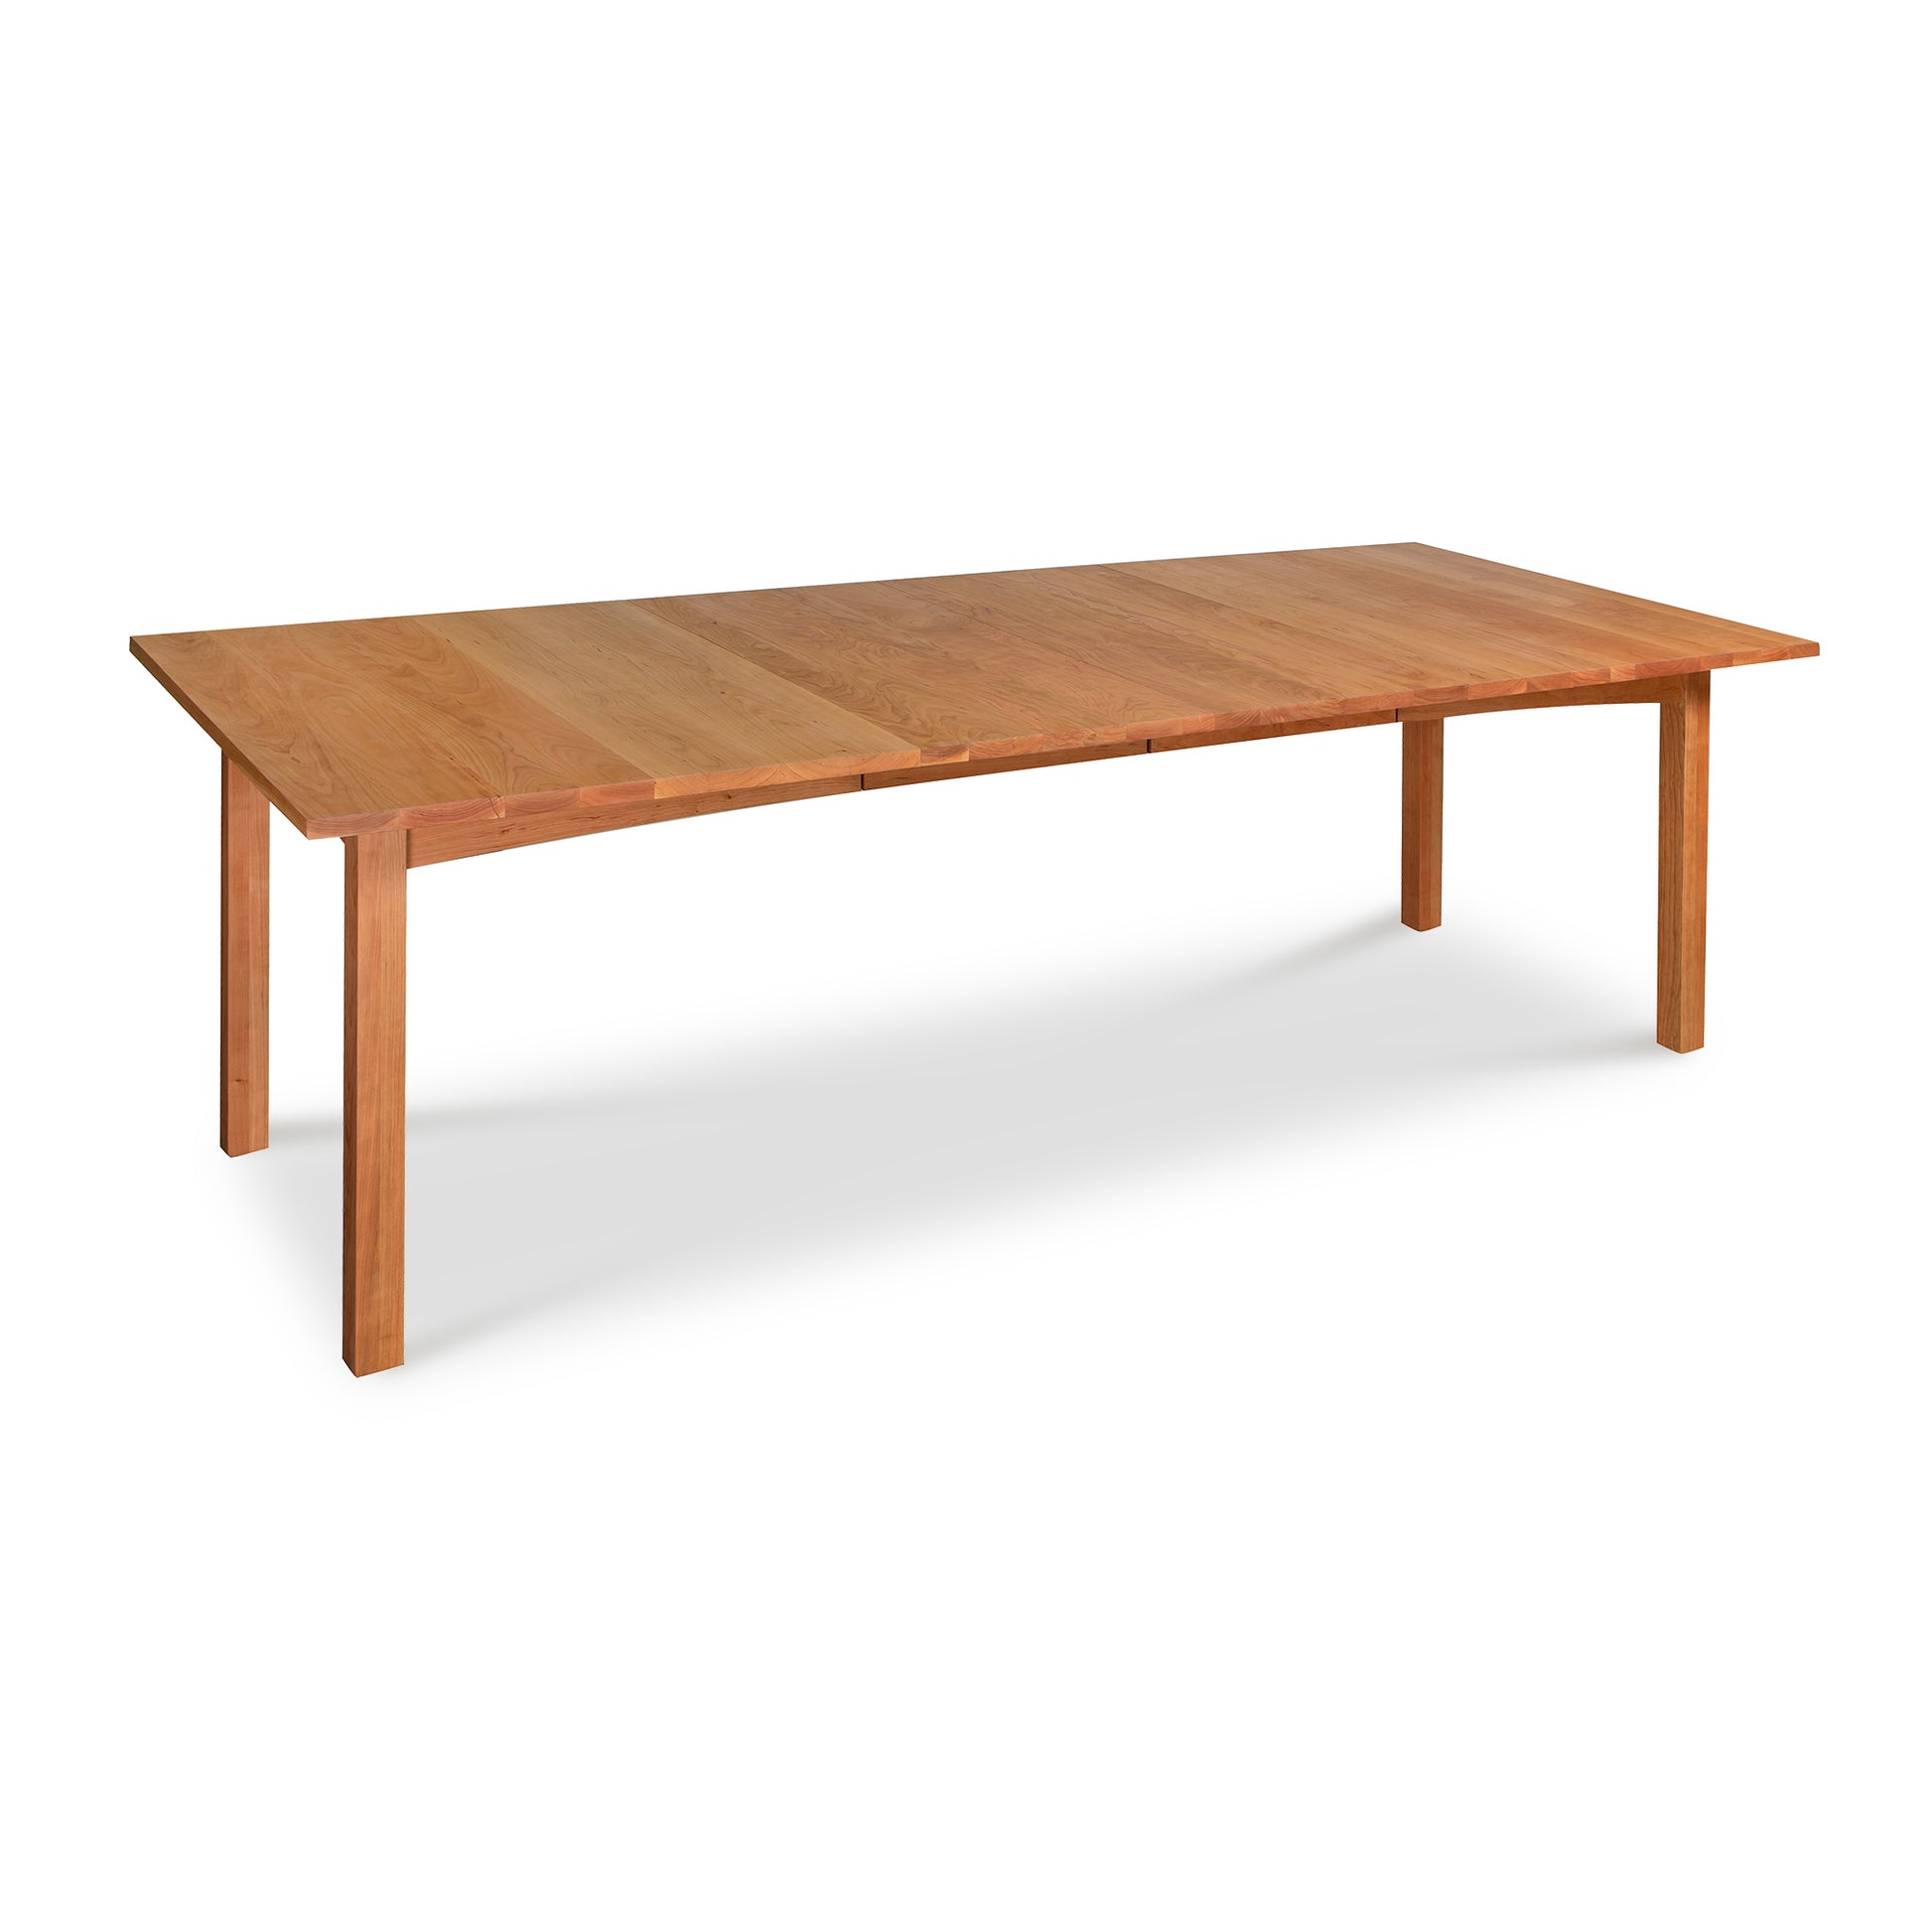 A simple solid woods Vermont Furniture Designs Burlington Shaker Extension Dining Table with four legs isolated on a white background.